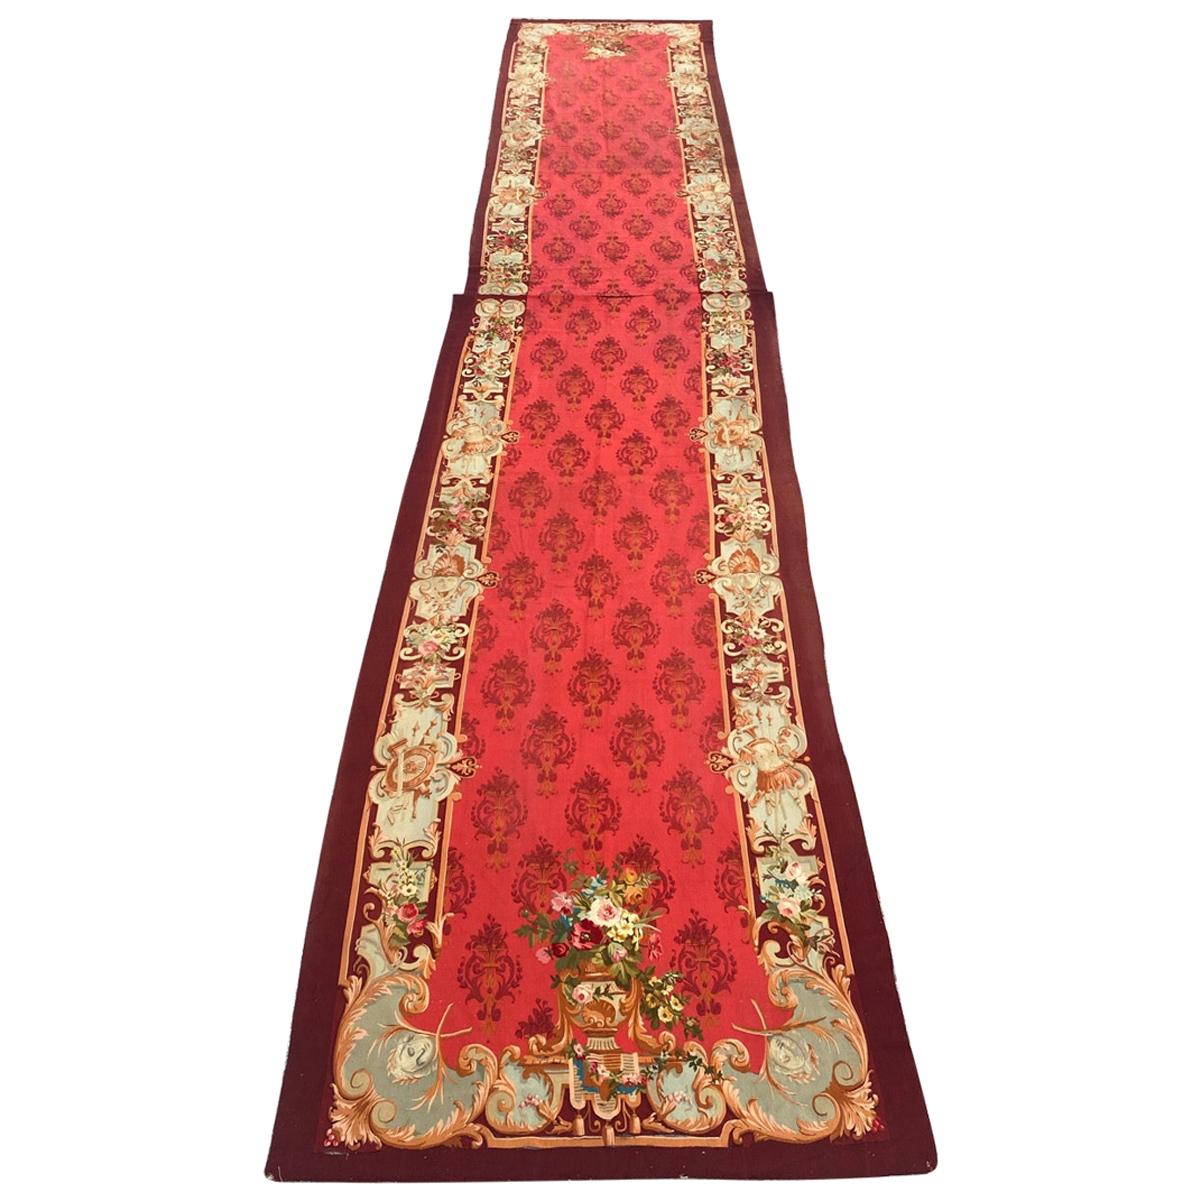 Wonderful Luxurious Antique Napoleon the Third Aubusson Tapestry Runner Rug